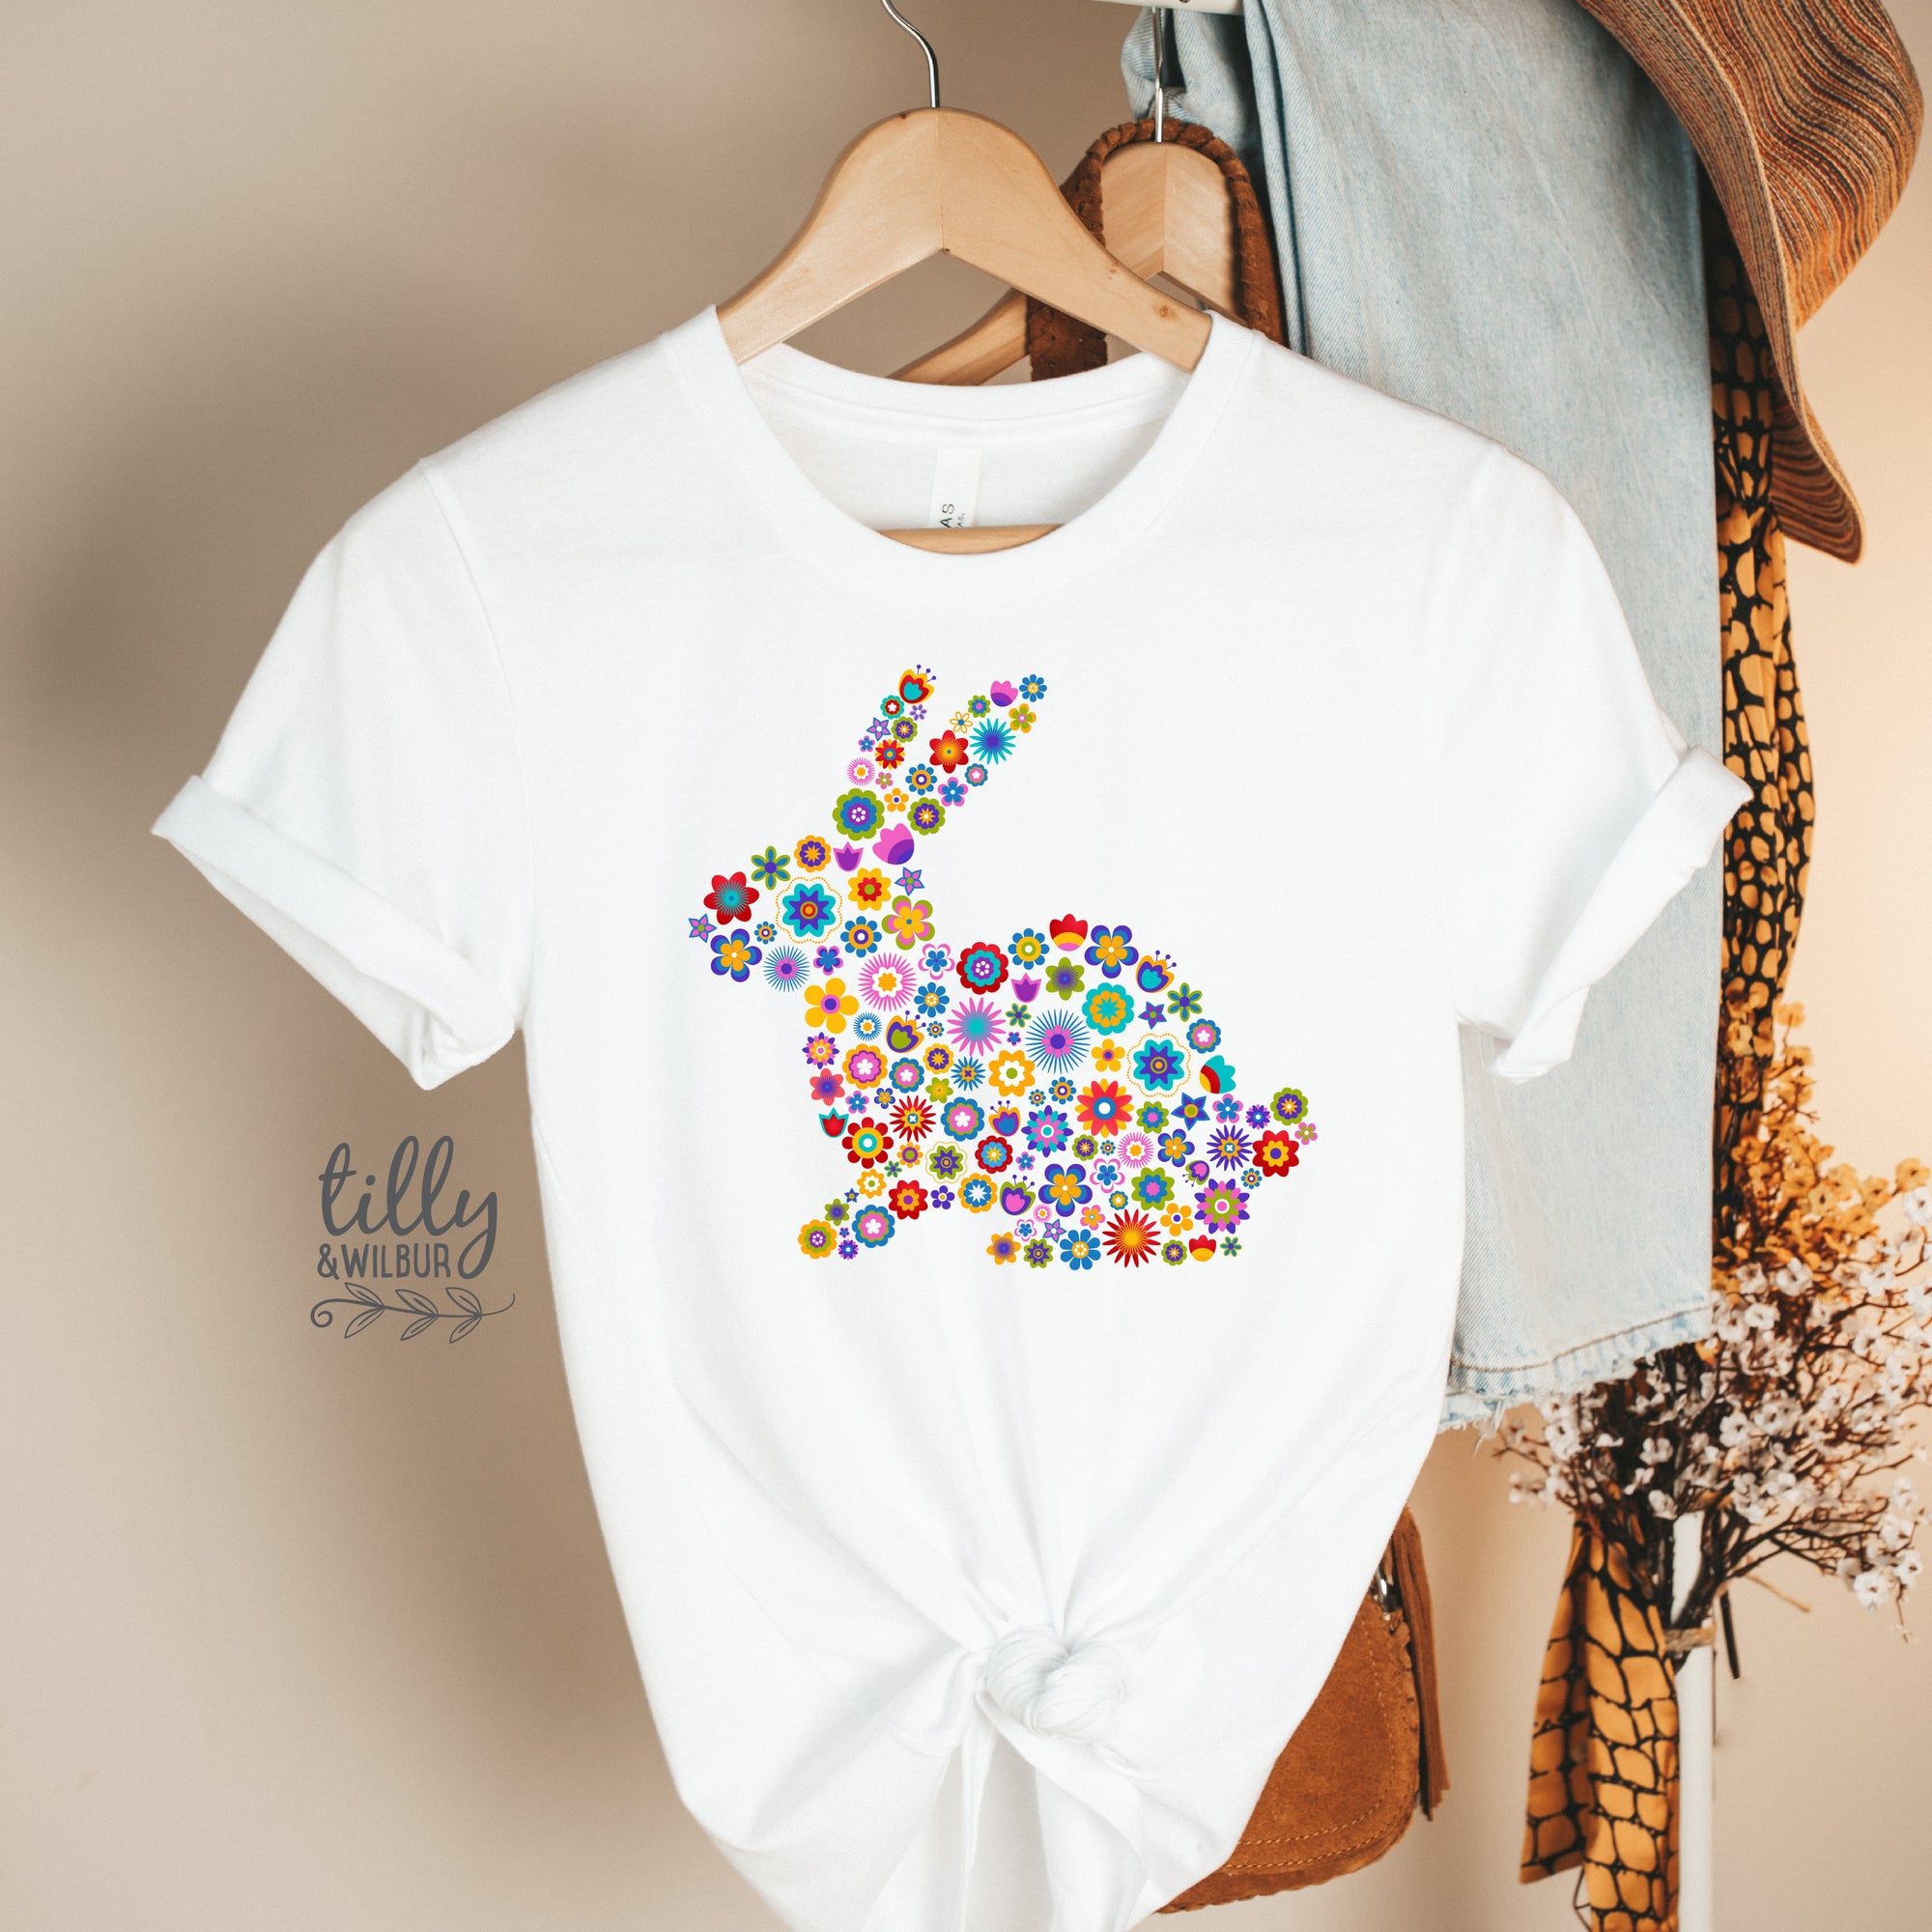 Easter T-Shirt For Women, Floral Retro Bunny Rabbit Print, Easter Bunny Shirt, Easter Egg Hunt, Easter Gift, Women&#39;s Easter T-Shirt Gift